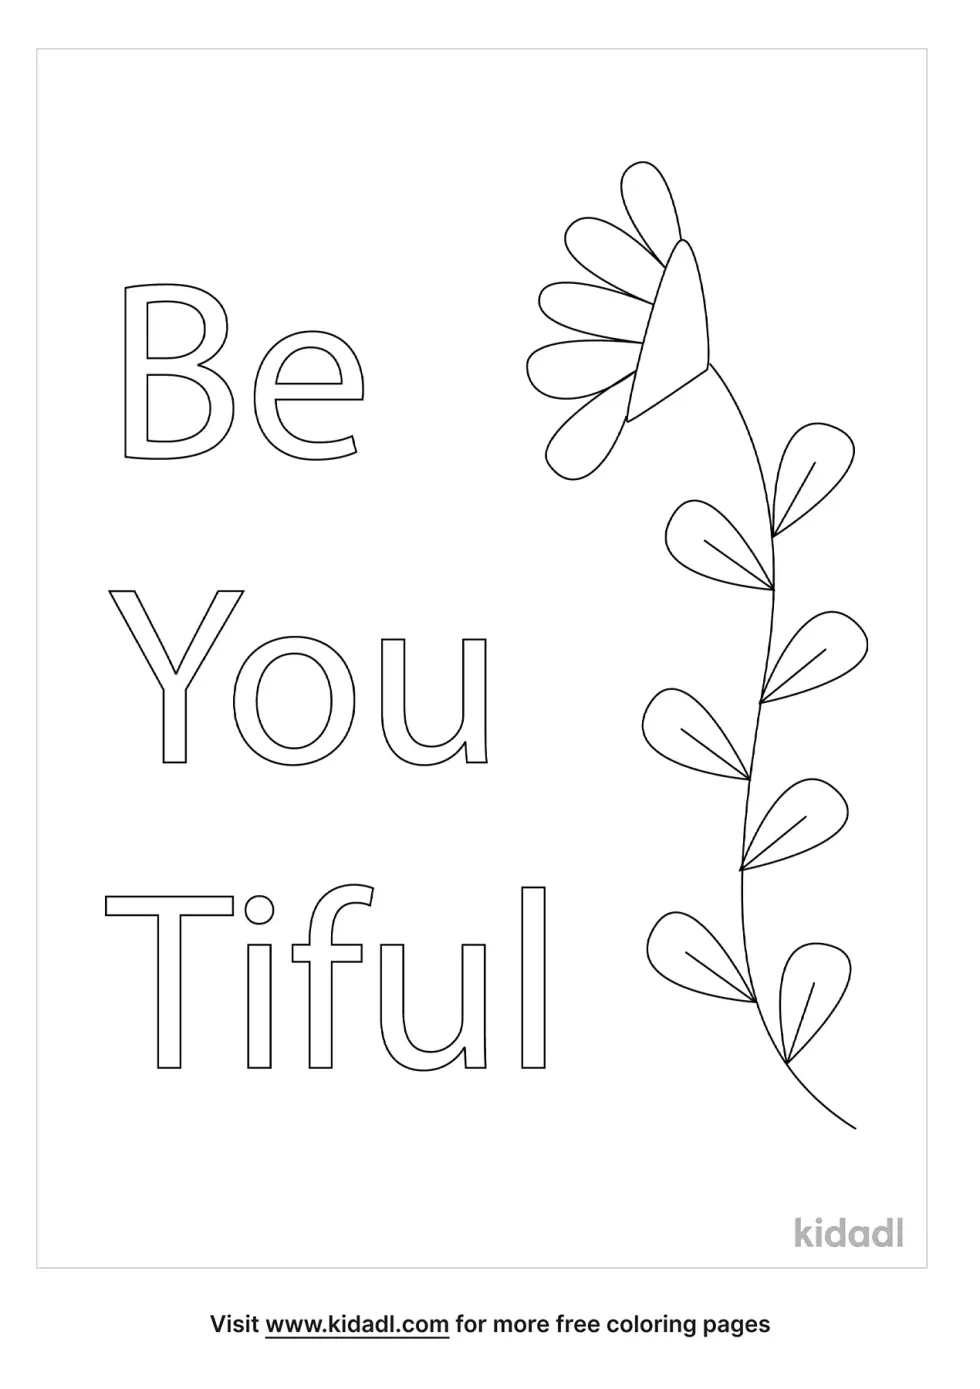 Be You Tiful Coloring Page